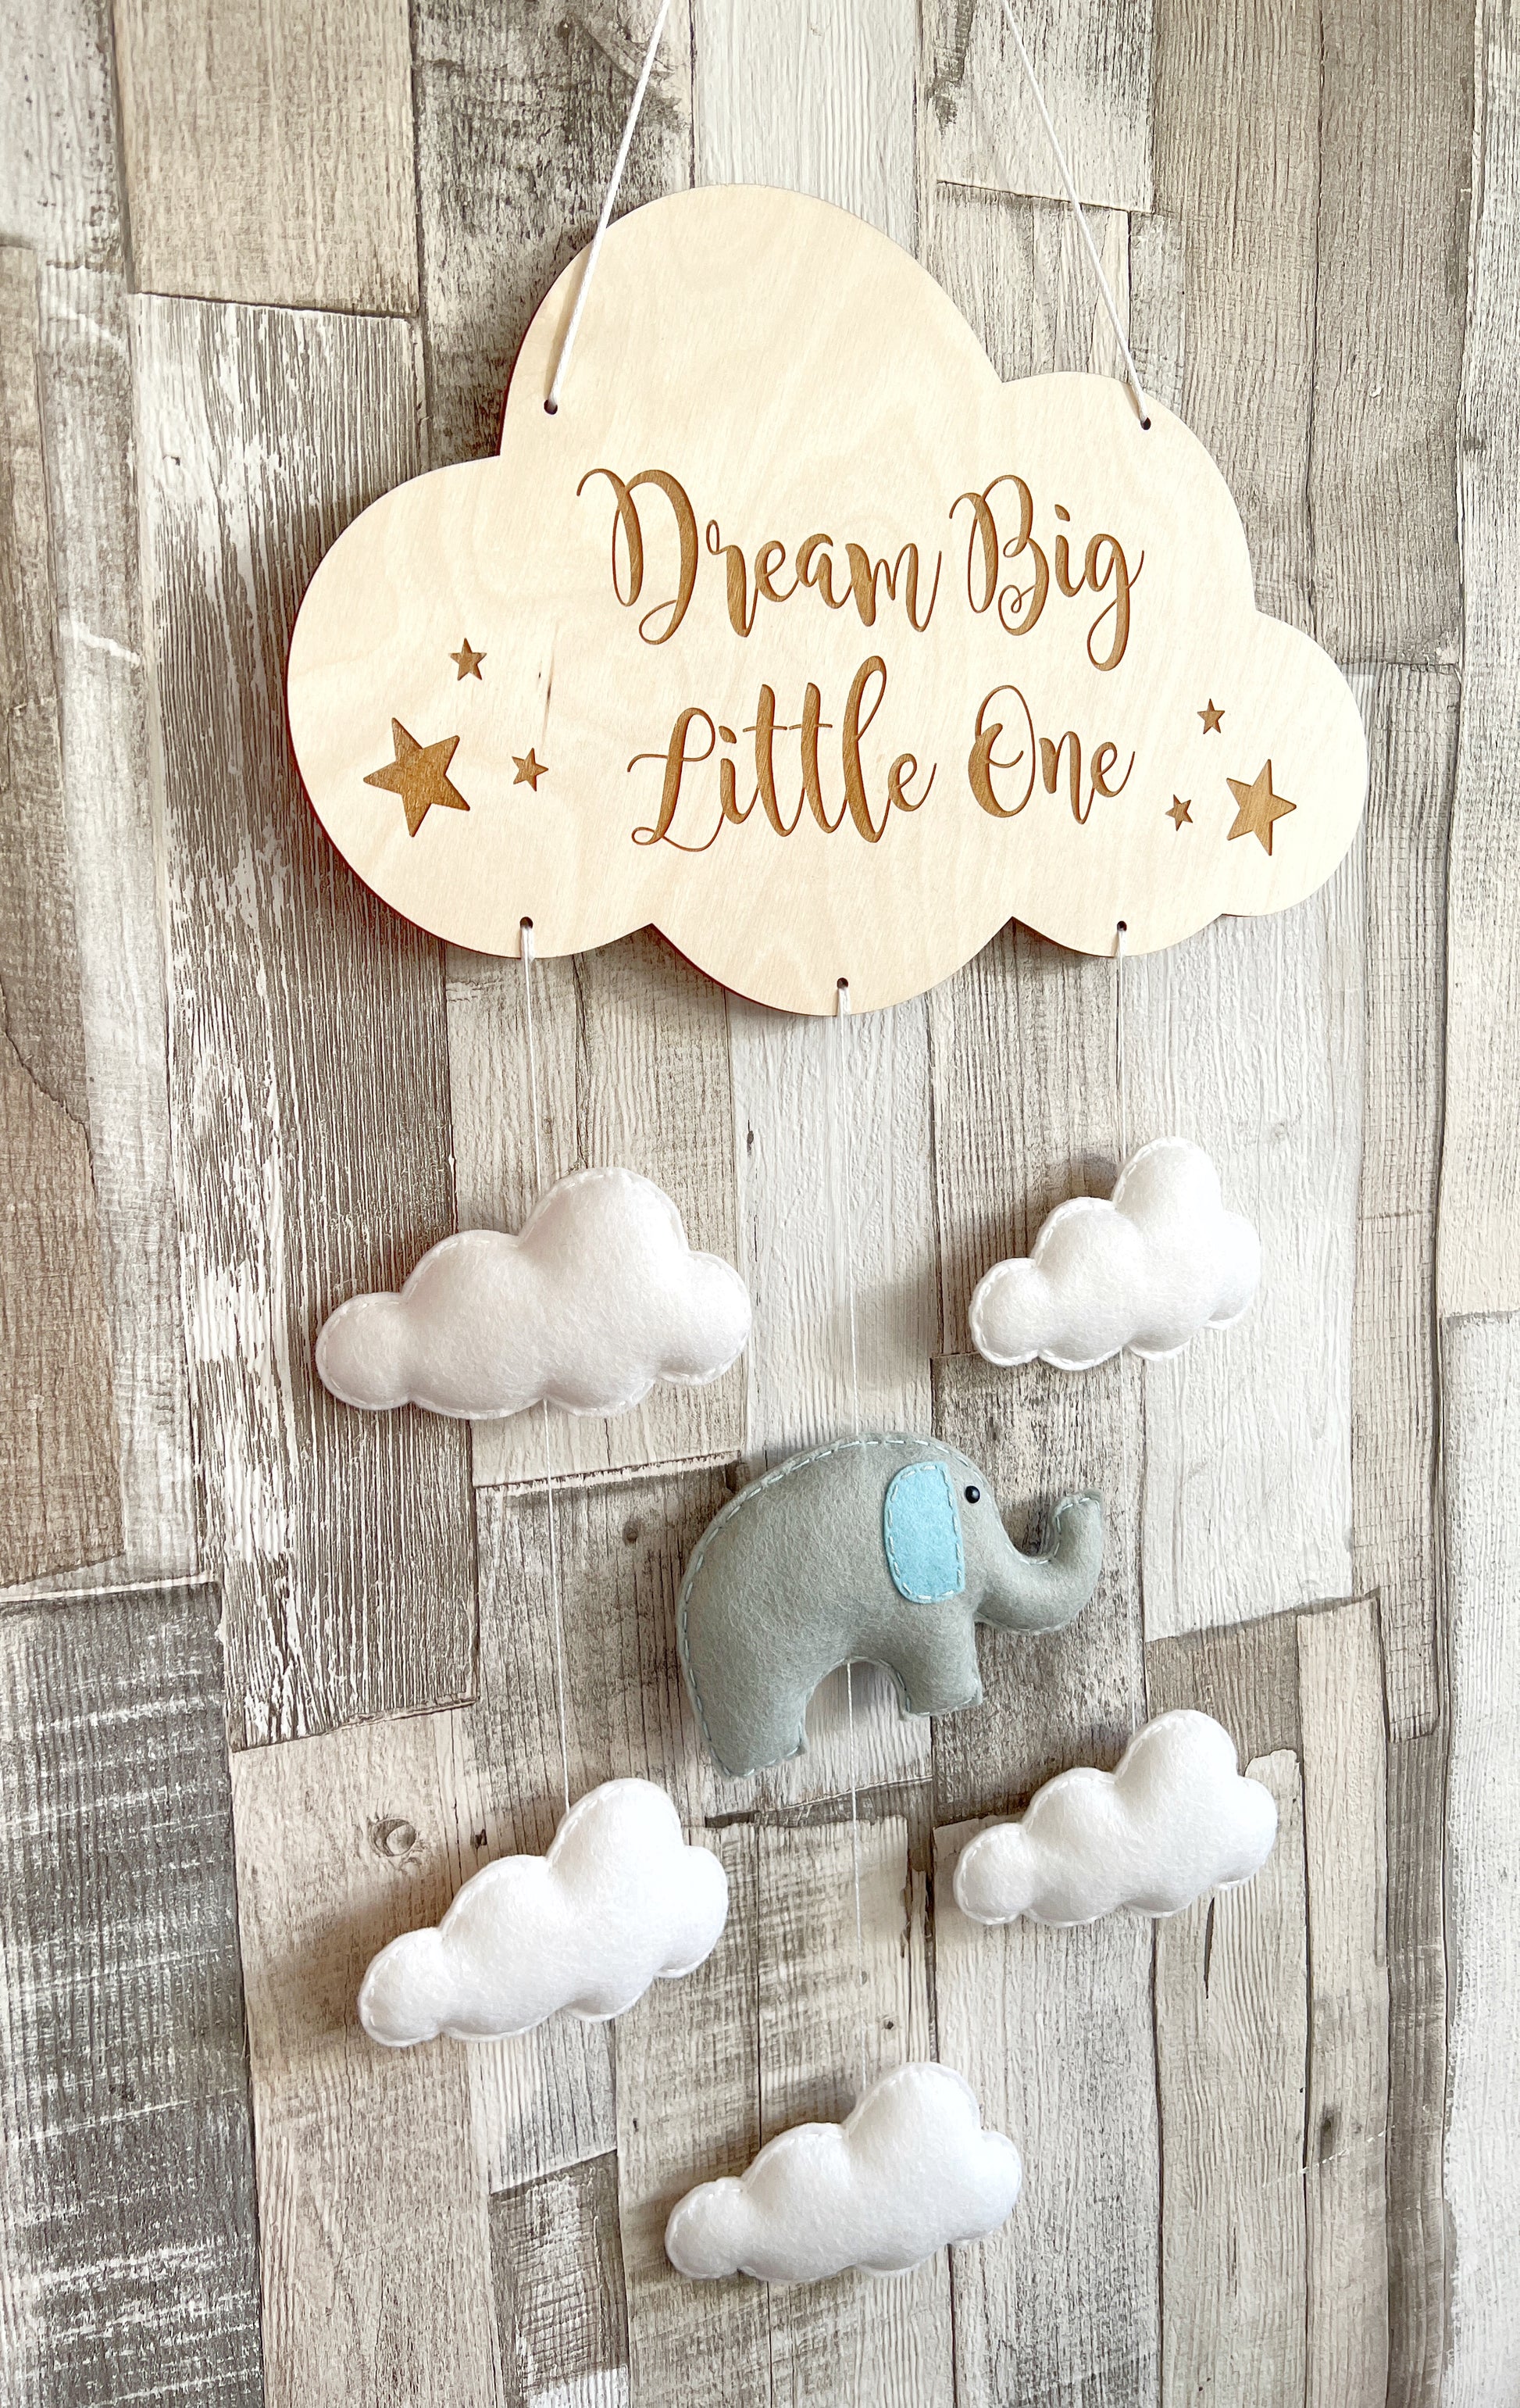 Dream Big Little One Elephant & Clouds Wall Mobile, Elephant Theme Nursery, Cloud Theme Nursery, Elephant Nursery Decor, Nursery Wall Art, Cloud Theme Nursery, Grey & White Nursery Decor, Neutral Nursery Decor, White Cloud Theme Nursery, Baby Mobile, Nursery Mobile, Baby Room Decoration, Elephant Nursery Mobile